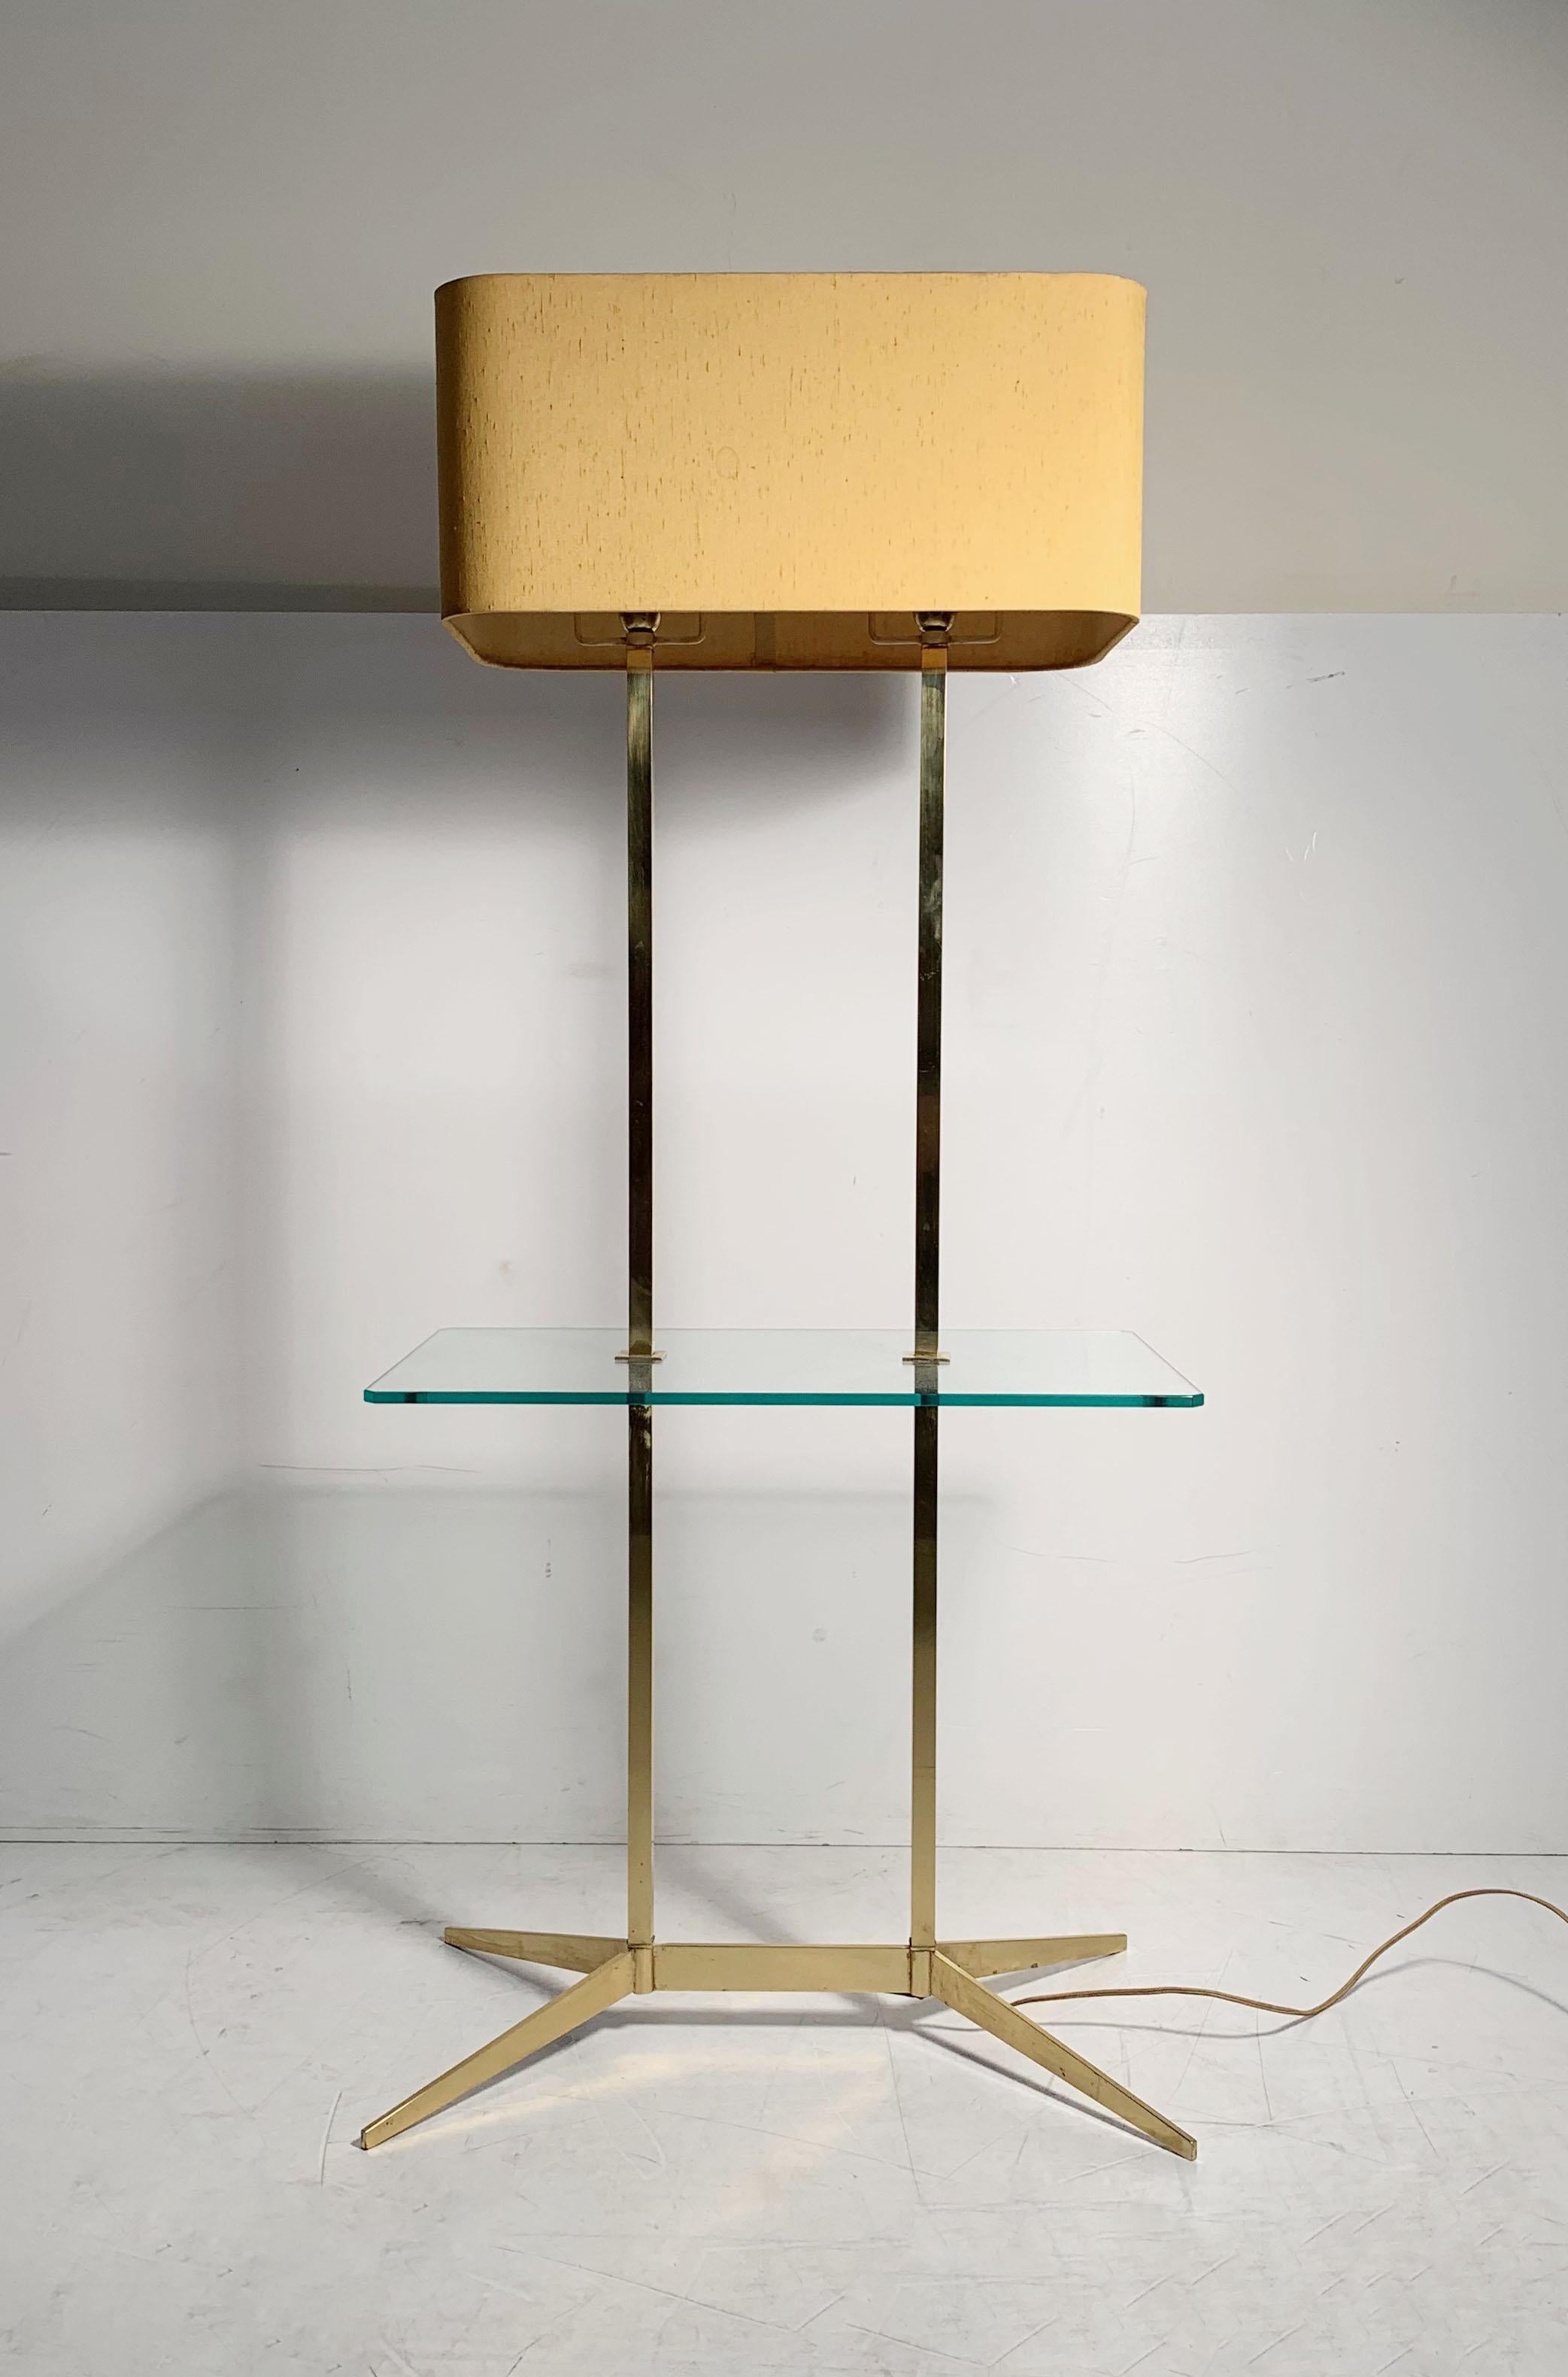 Vintage Mid-Century Modern brass table floor lamp. In the manner of Paul McCobb, Gerald Thurston, Arredoluce and Fontana Arte. I believe the lamp is manufactured by Stiffel. Glass tabletop was specially cut to match the wood top that had originally